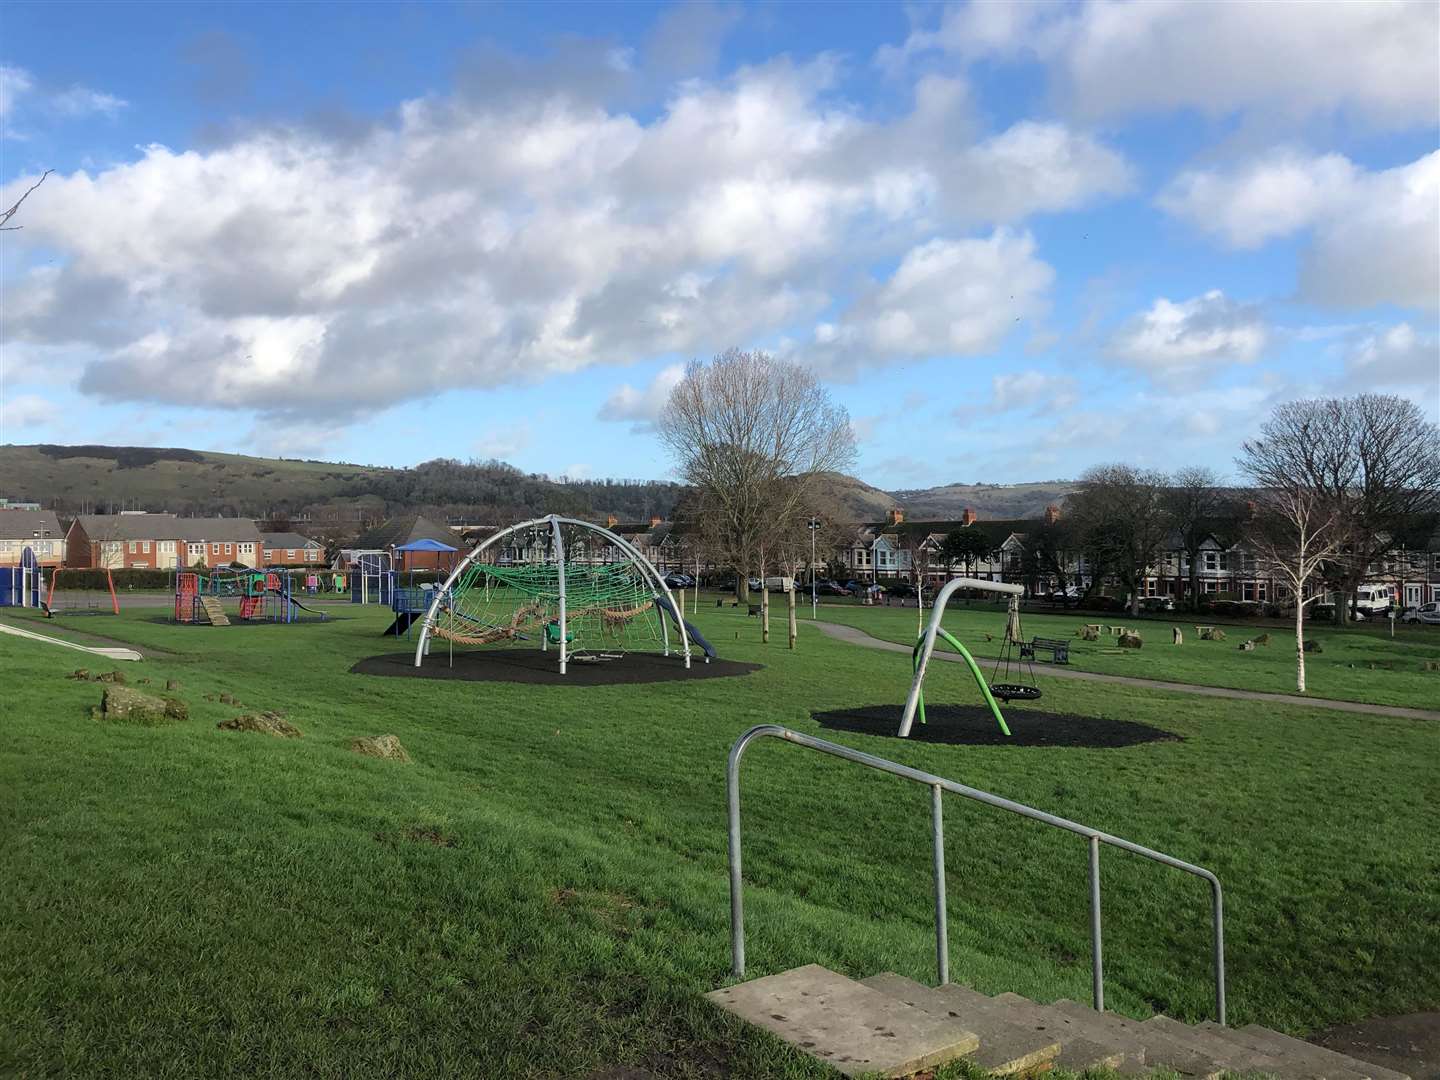 Cheriton Recreation Ground is blighted by anti-social behaviour